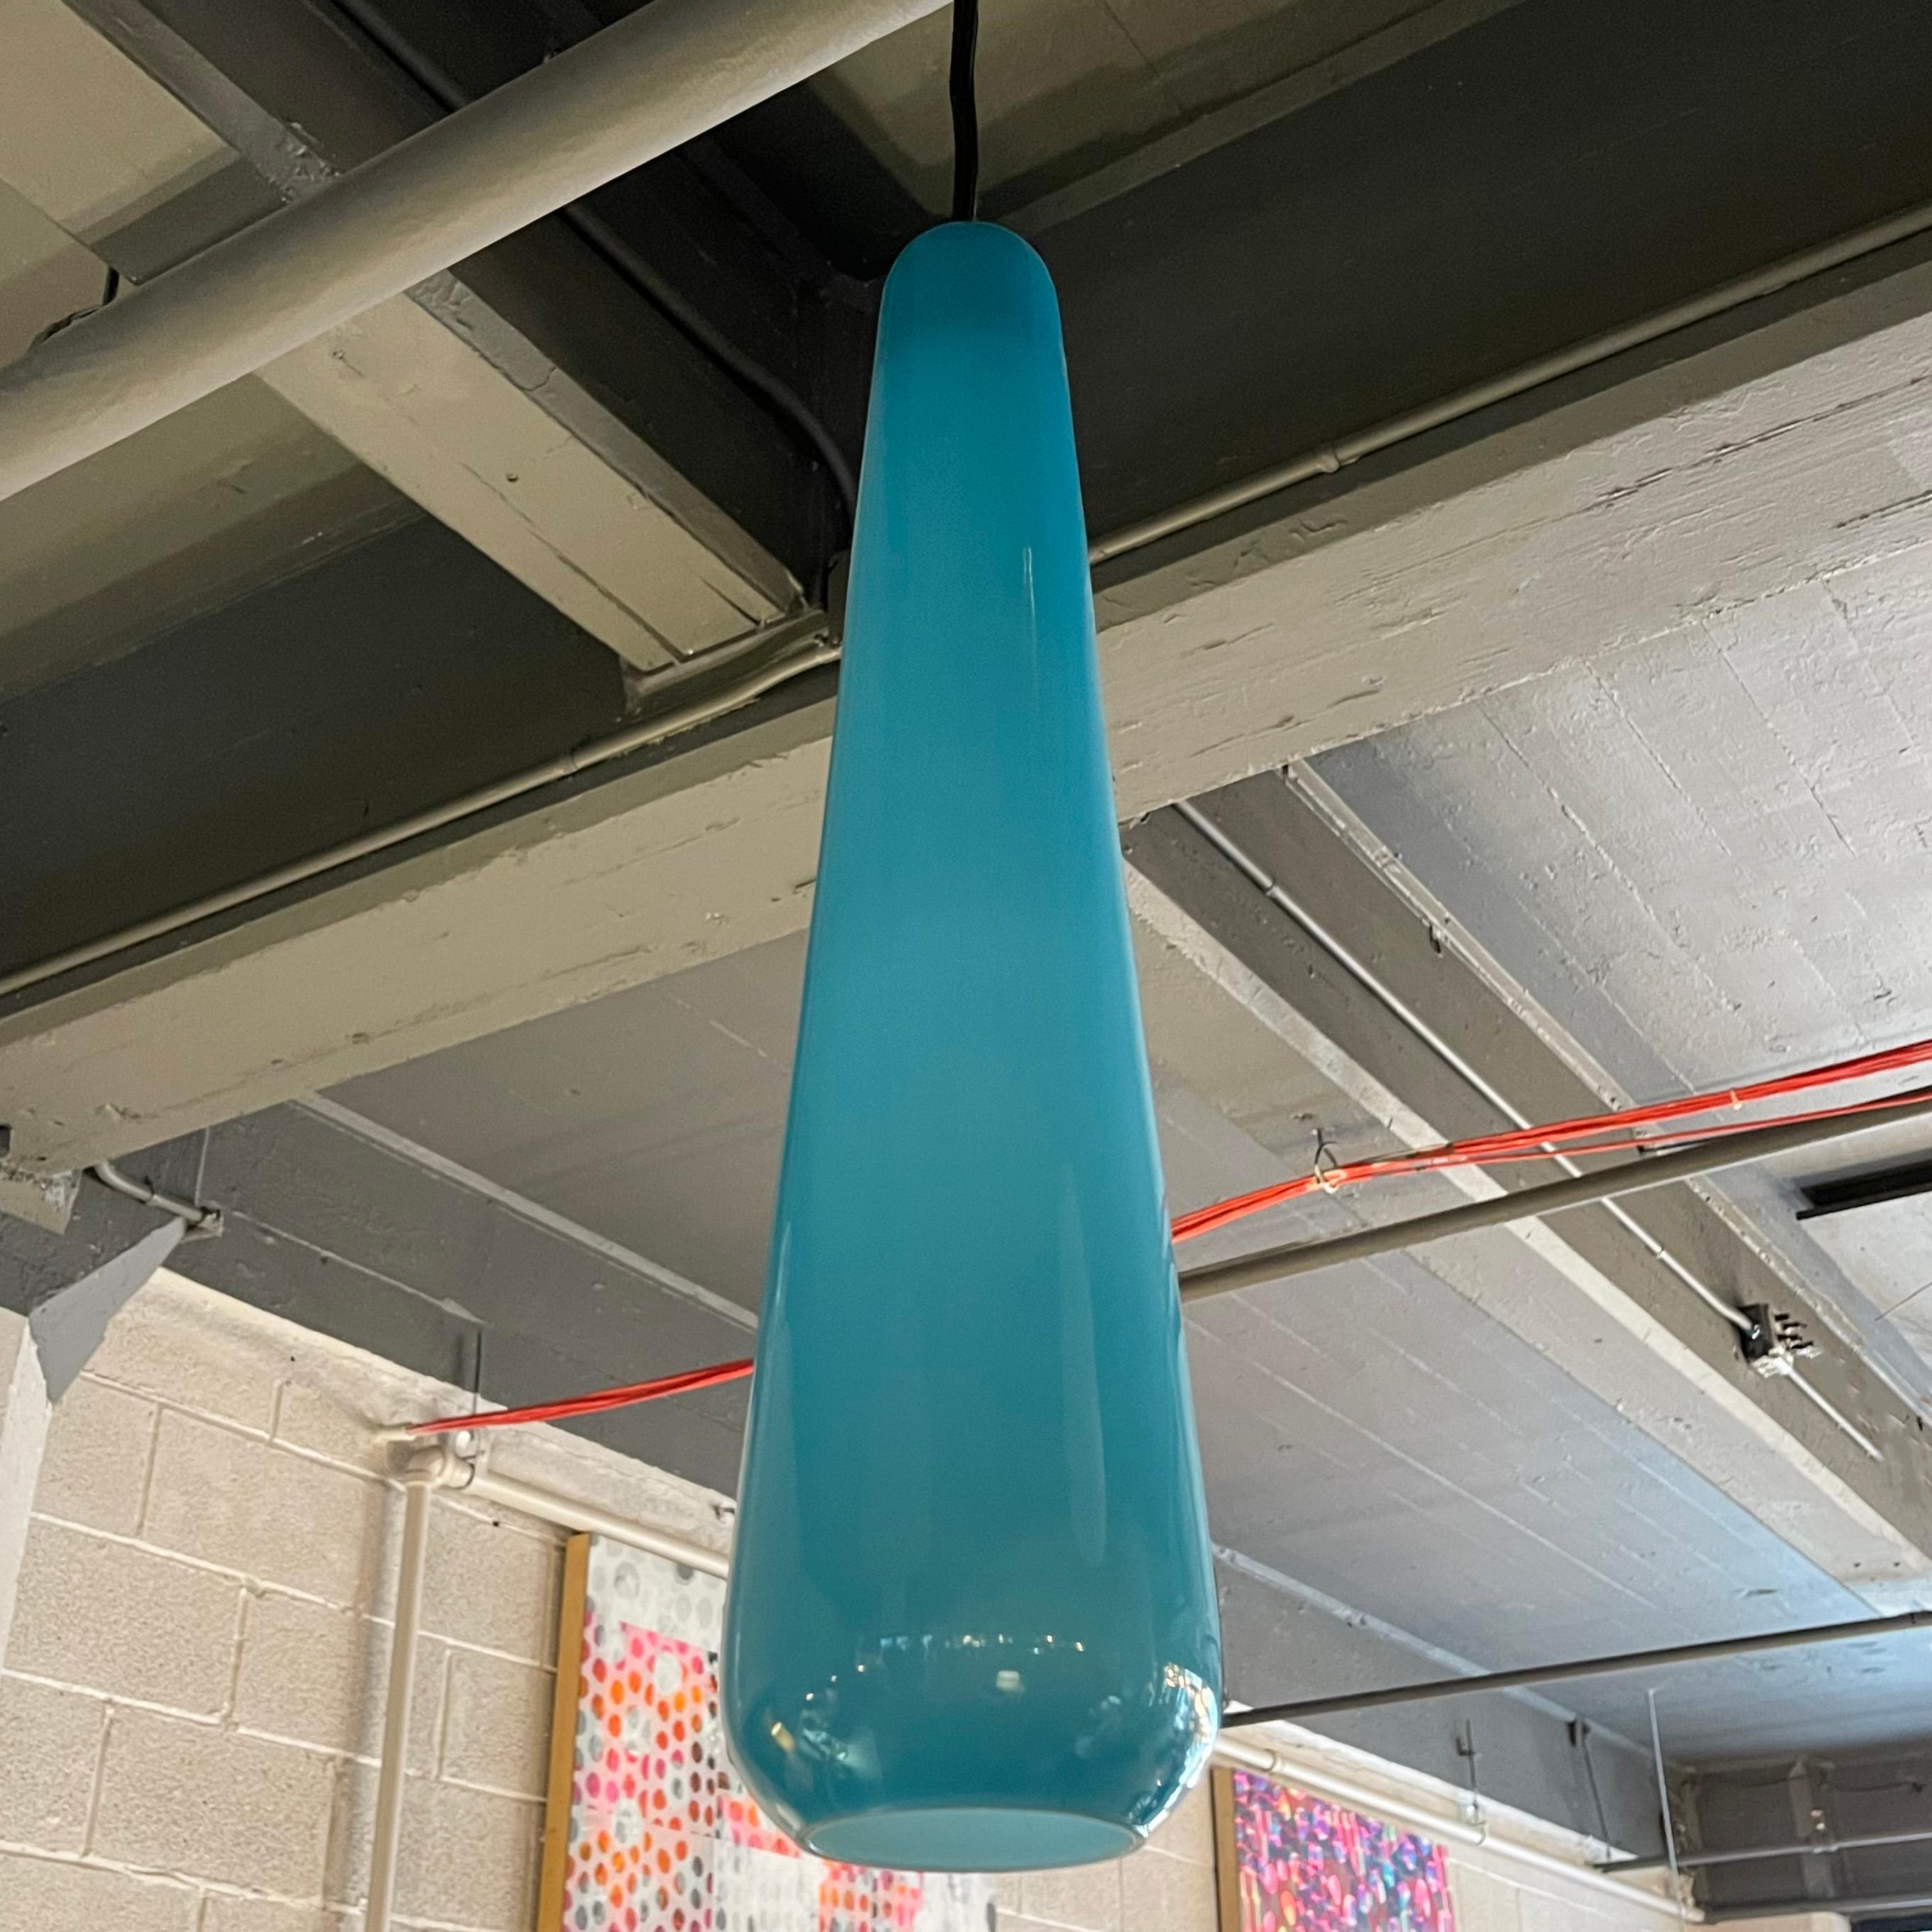 Scandinavian modern, art glass pendant light features an elongated, light blue teardrop shade with white interior on black cord with brass disc canopy. The pendant is newly wired to accept up to a 75 watt medium socket bulb and hangs at an overall